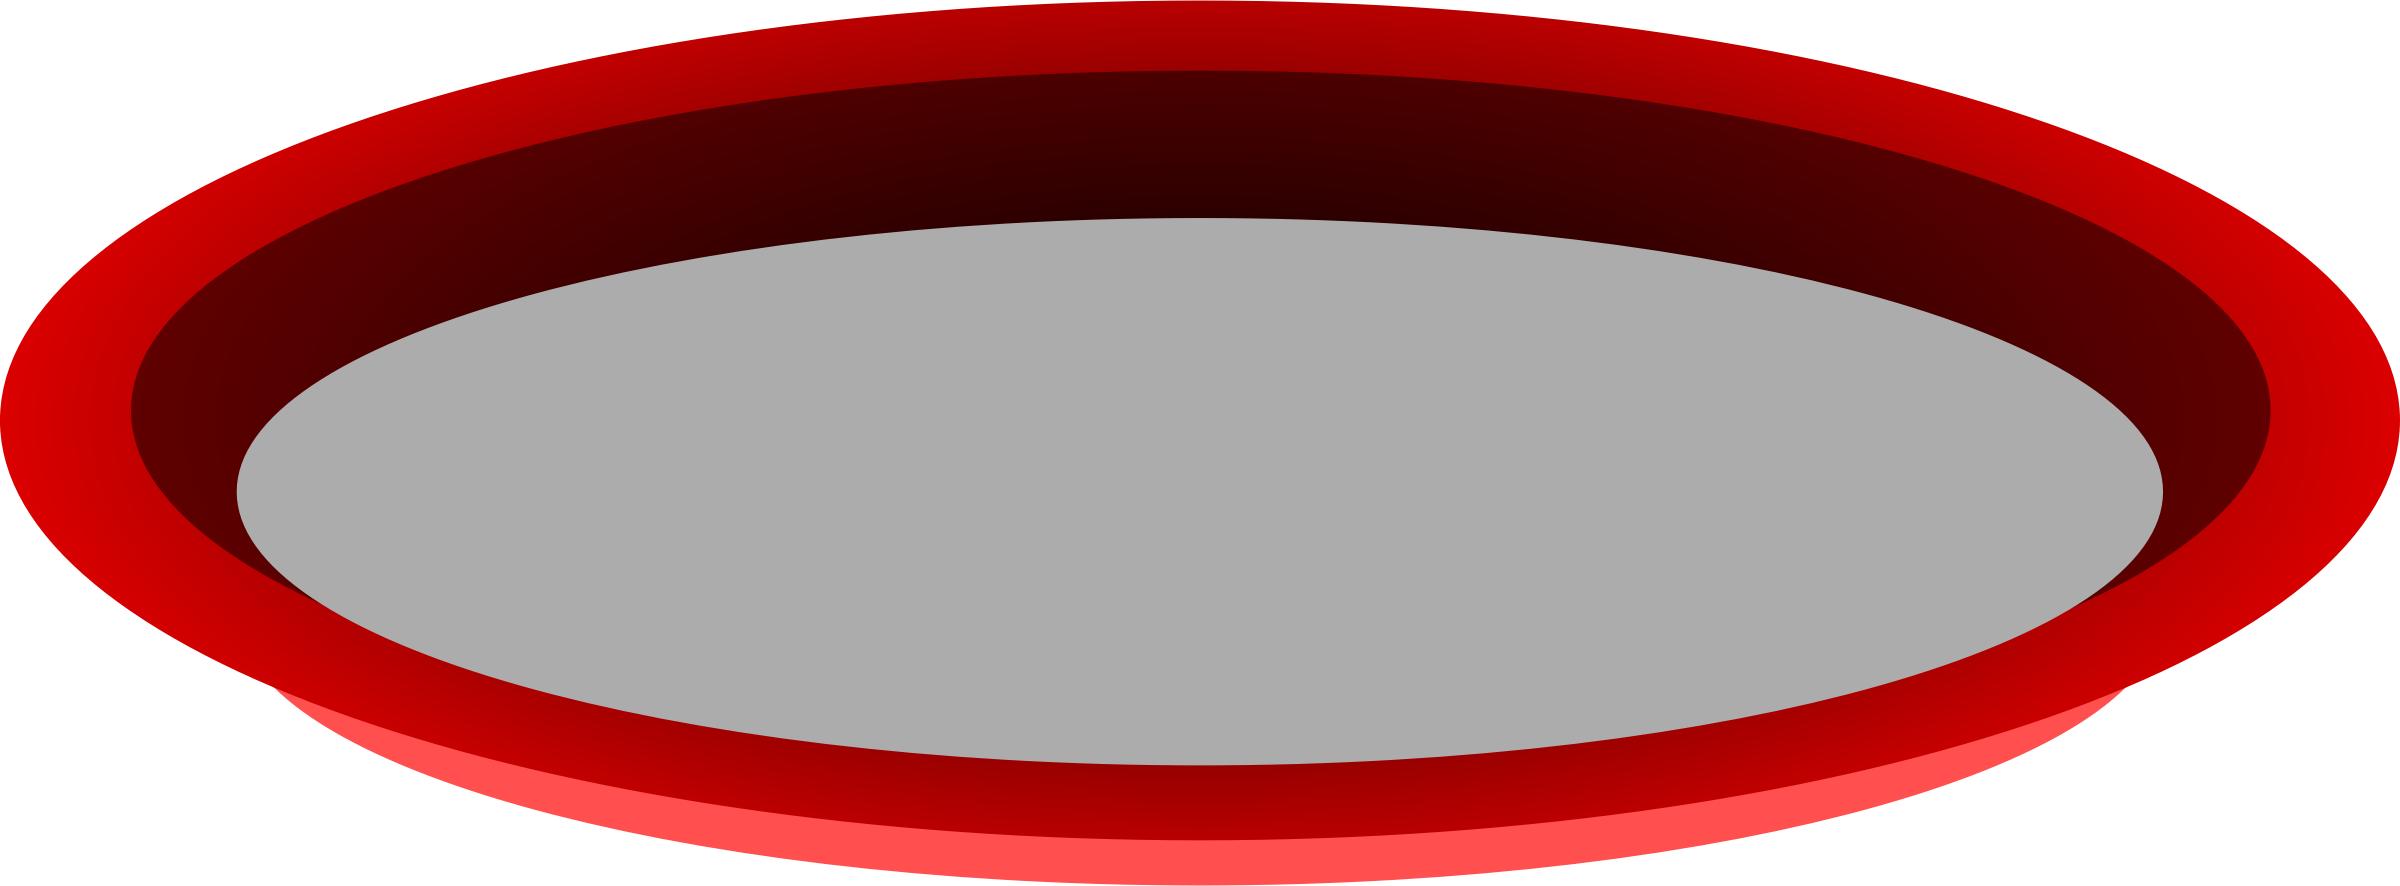 Serving tray png